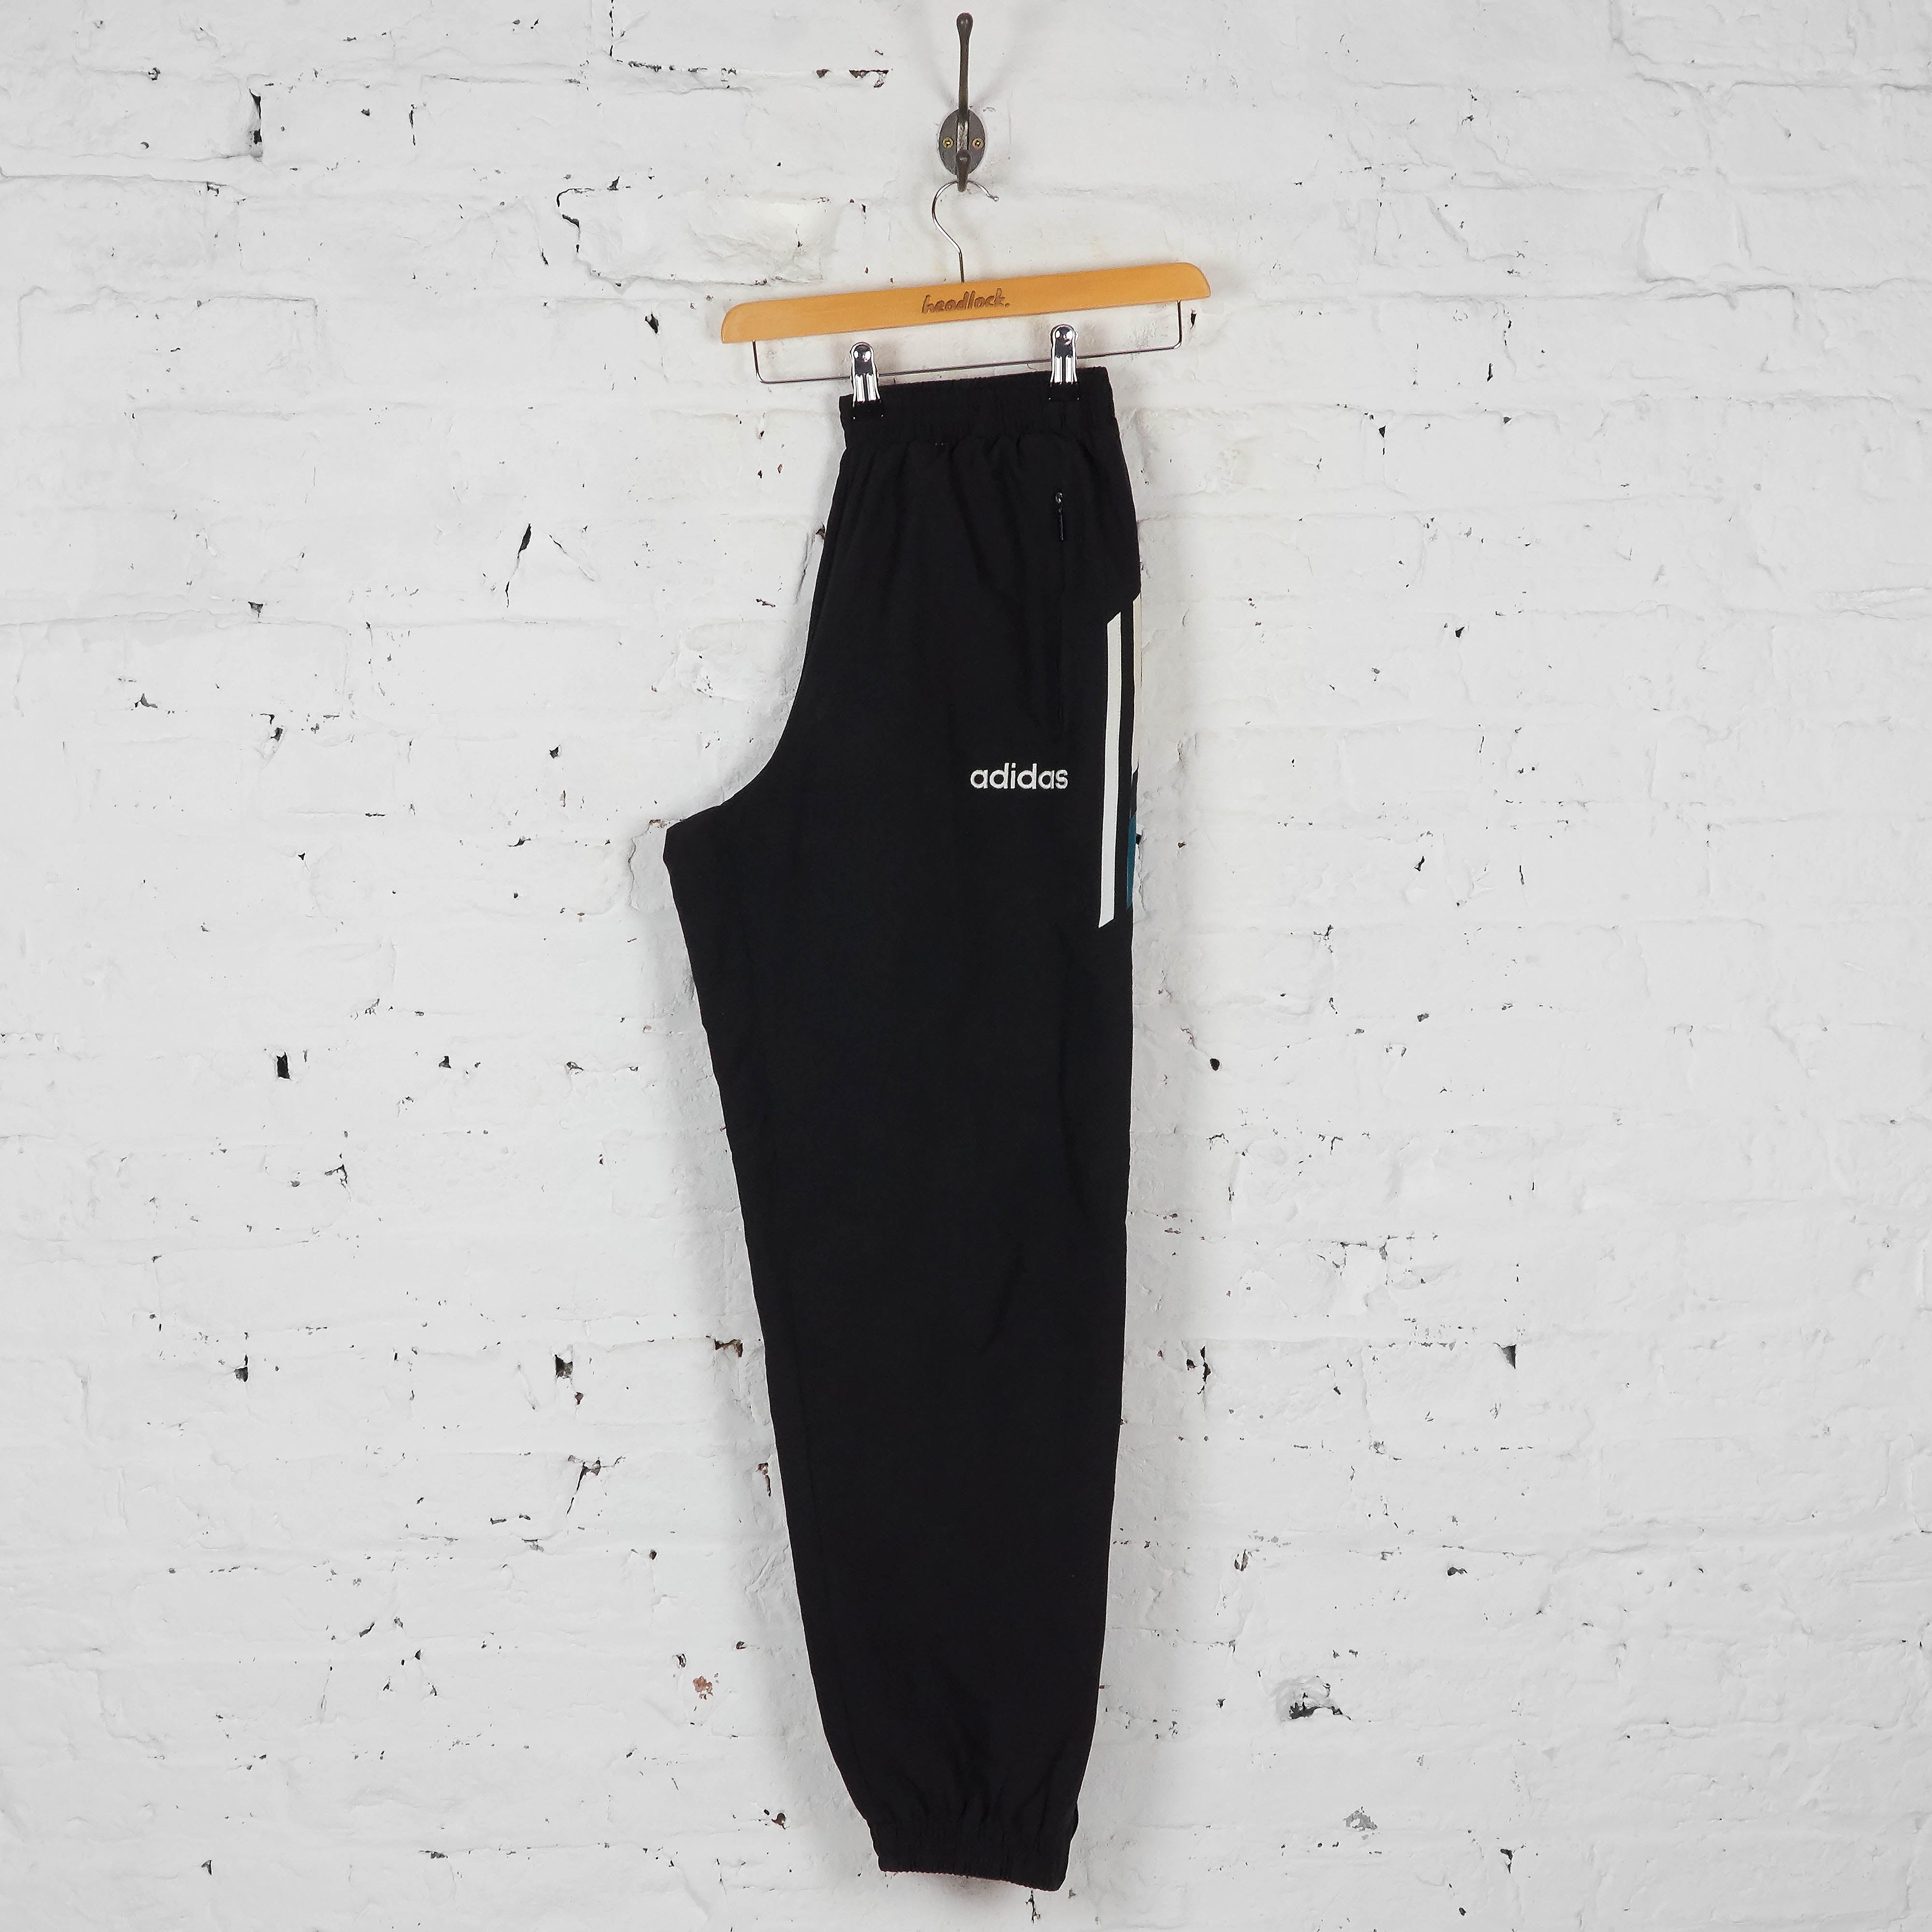 Adidas 90s Archive Velour Track Pant adidas